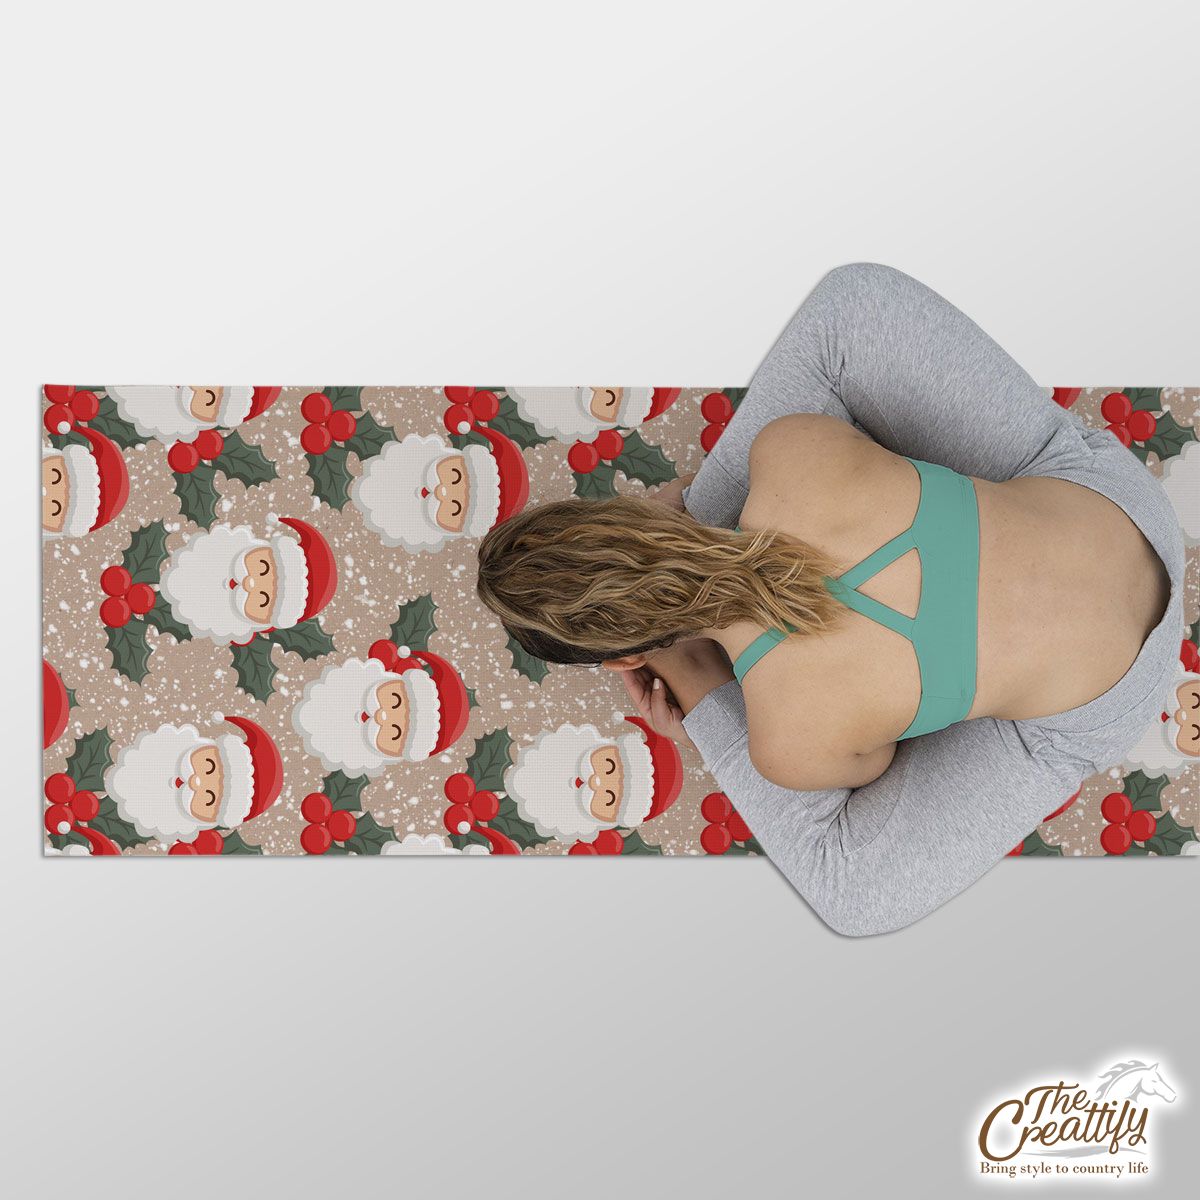 Santa Clause And Holly Leaf On Snowflake Background Yoga Mat